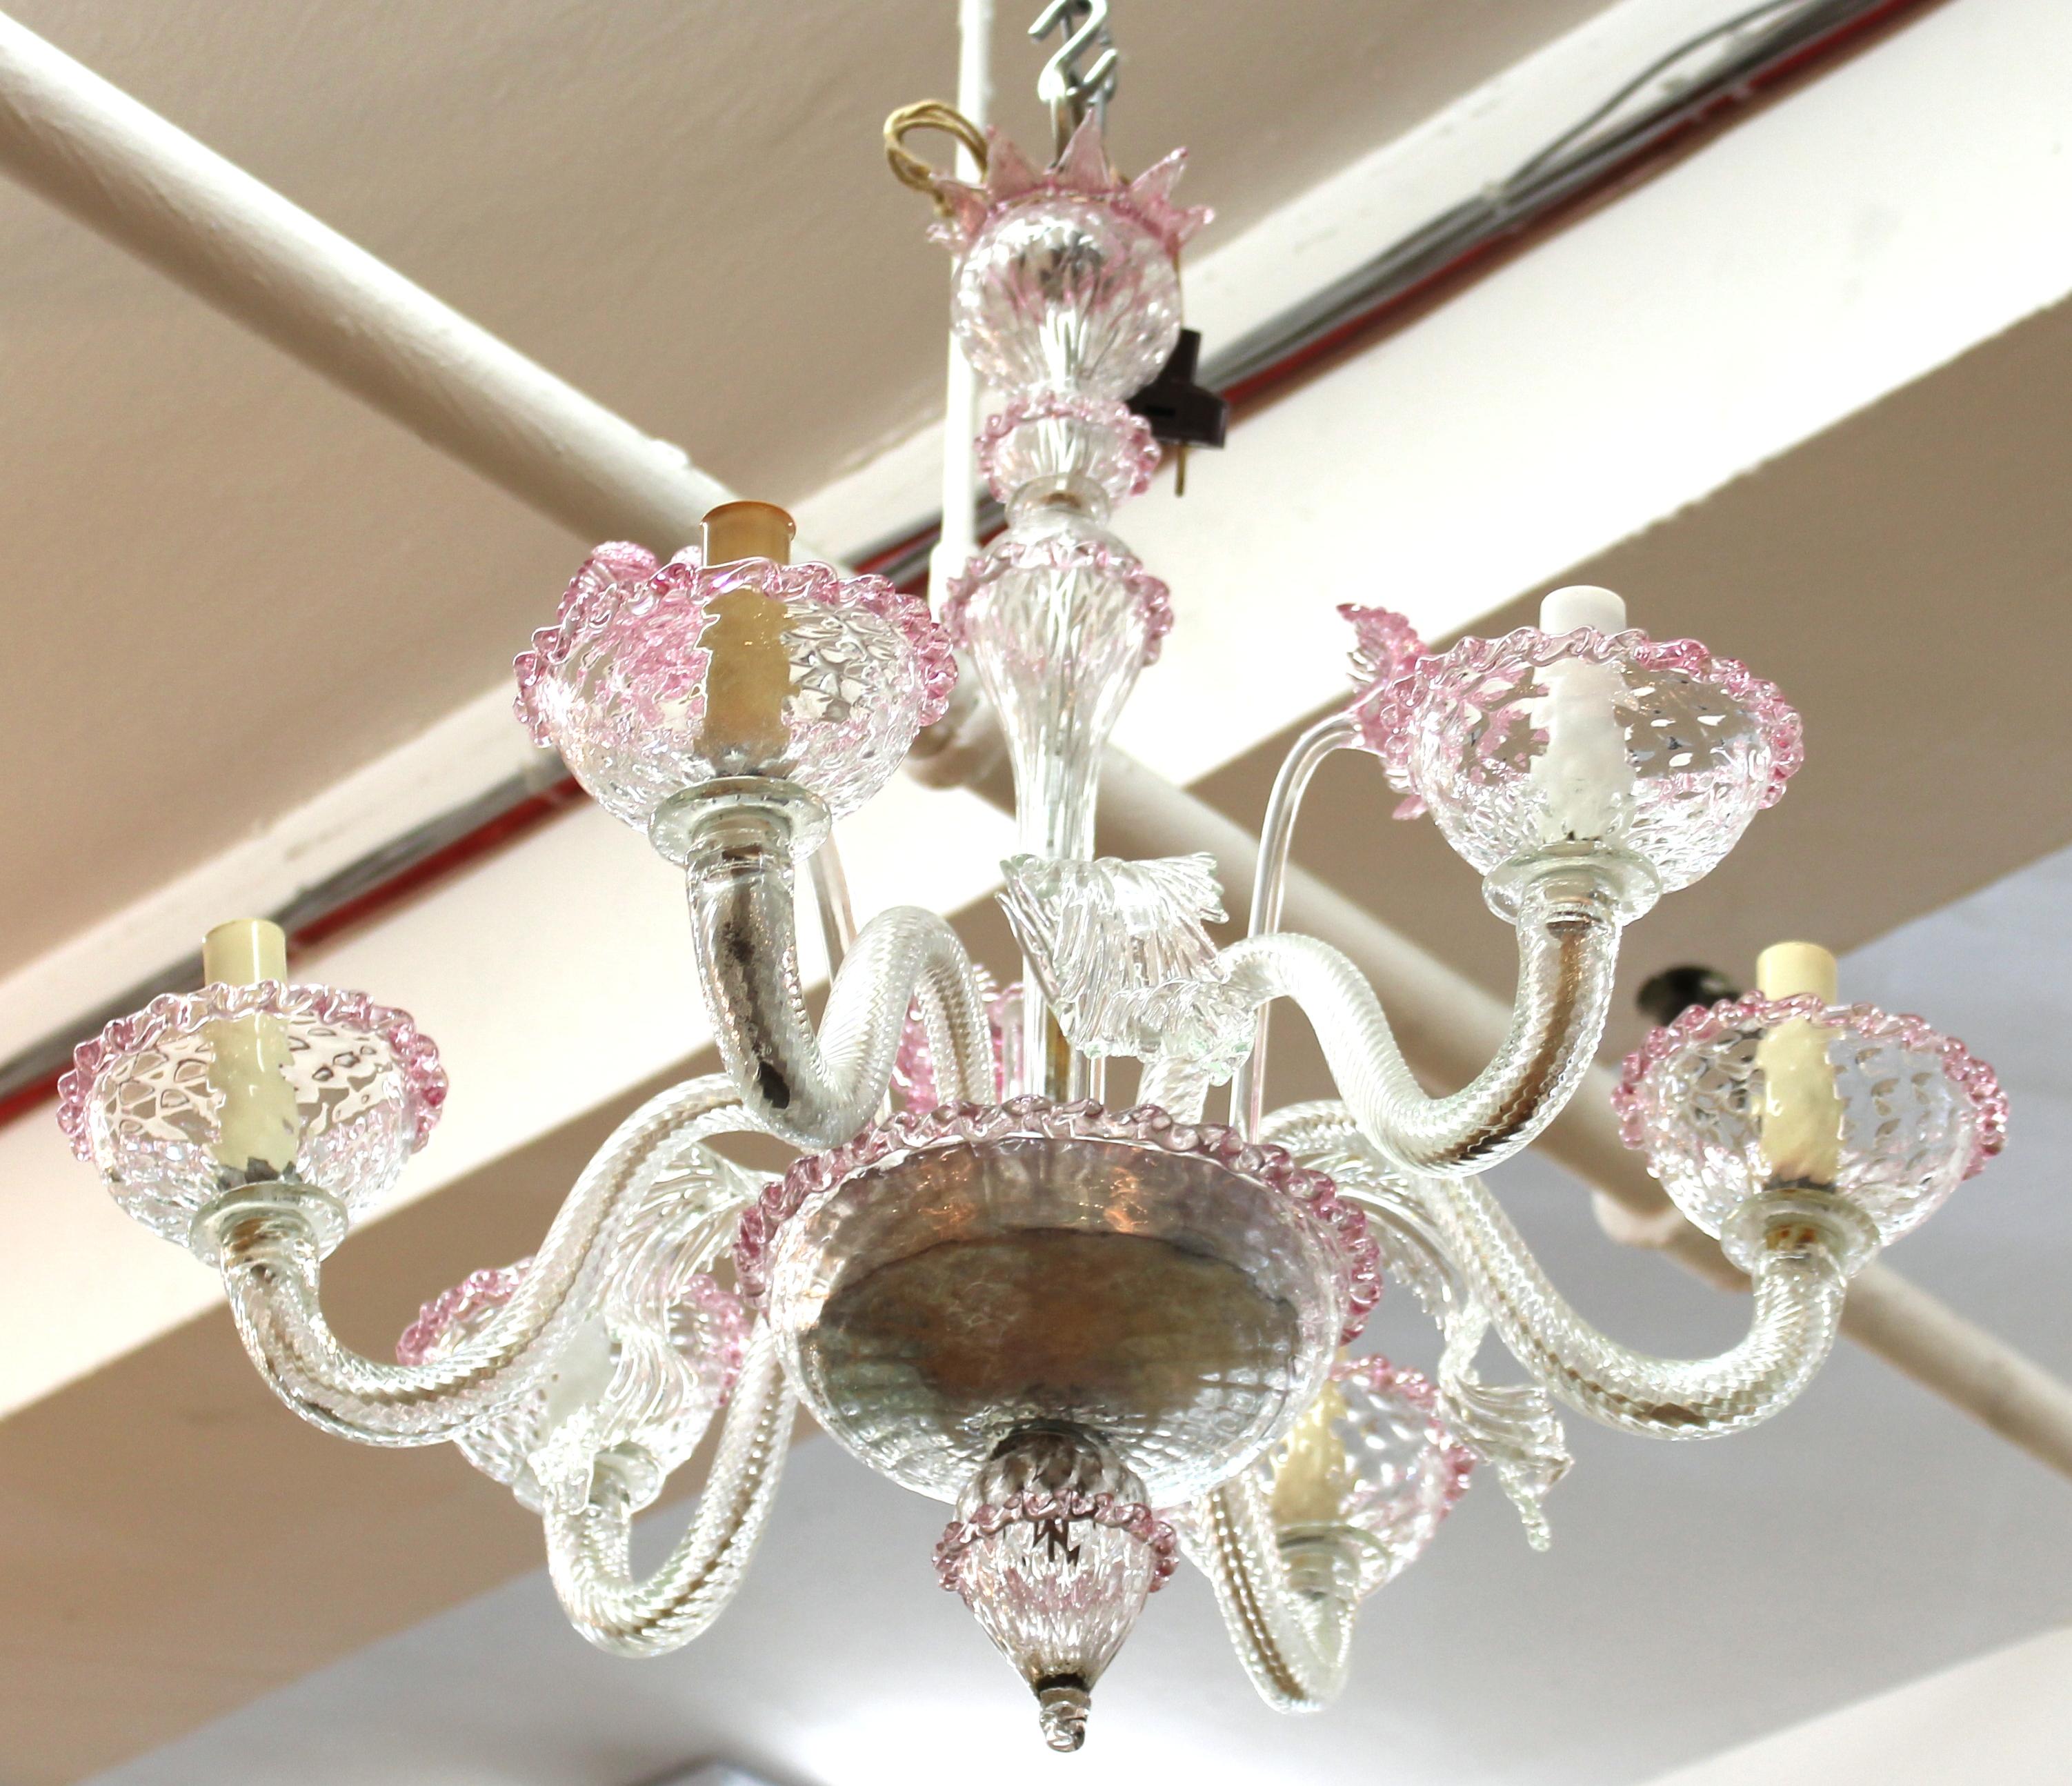 Italian Venetian Murano glass diminutive chandelier with floral glass elements and pink hued glass flowers.